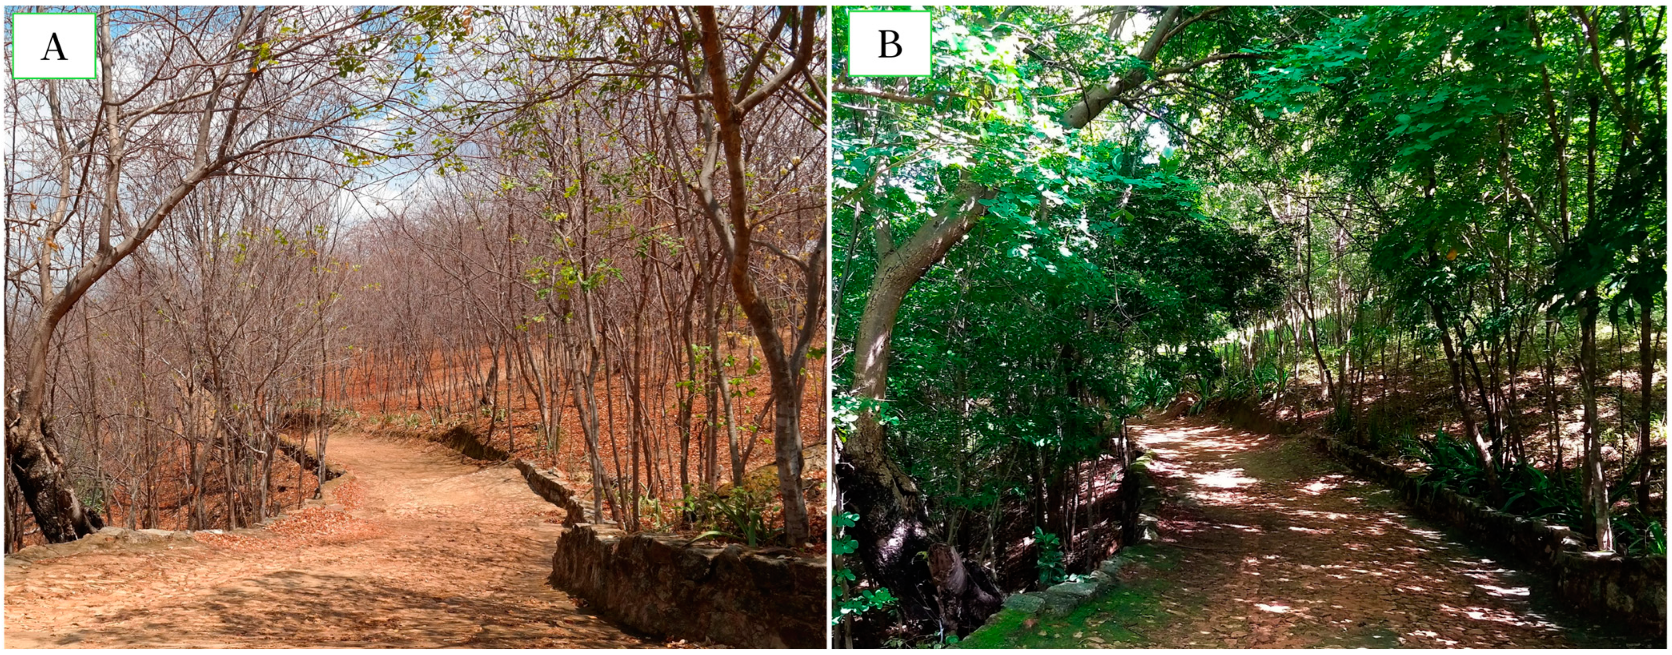 Geosciences | Free Full-Text | A Network Perspective of the Ecosystem's Health Provision Spectrum in the Trails of UNESCO Global Geoparks: Santo Sepulcro and Riacho do Meio Araripe UGG (NE